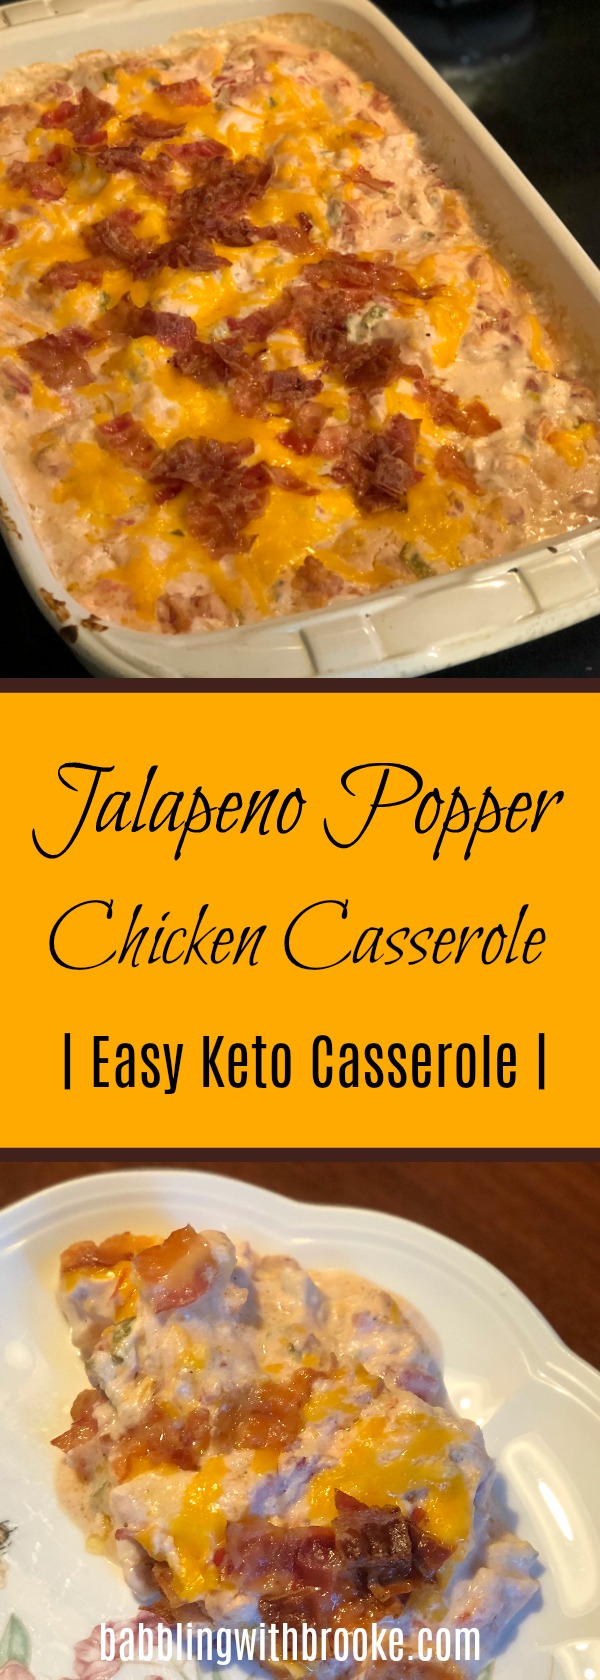 This easy keto casserole recipe is to die for! It is so good that you will have it on your recipe rotation for good. #easyketodinnerrecipe #easydinnerrecipe #easyketocasserole #ketocasseroles #easyfamilydinners